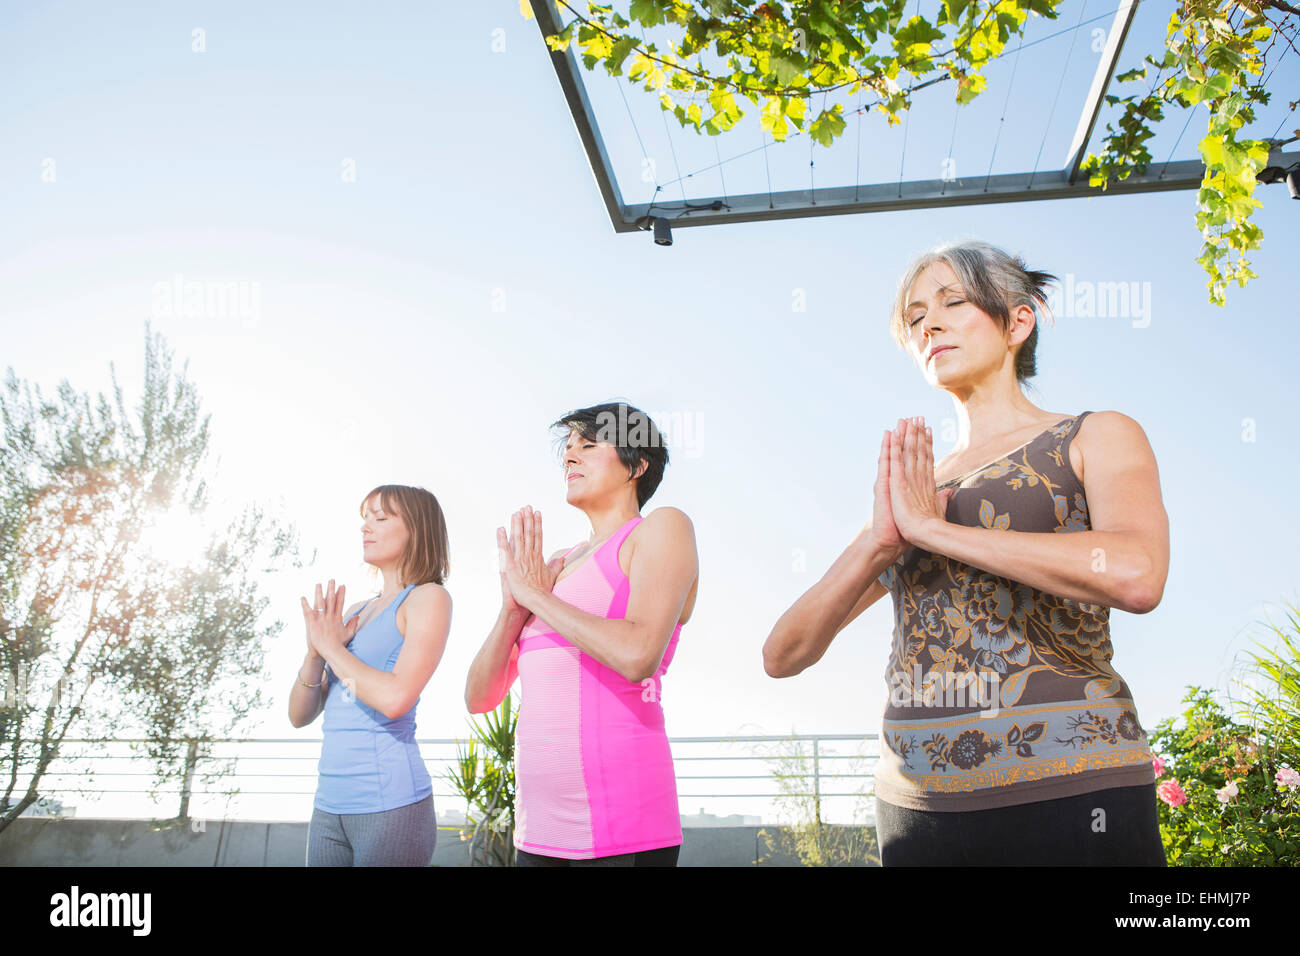 Women practicing yoga together on urban rooftop Stock Photo